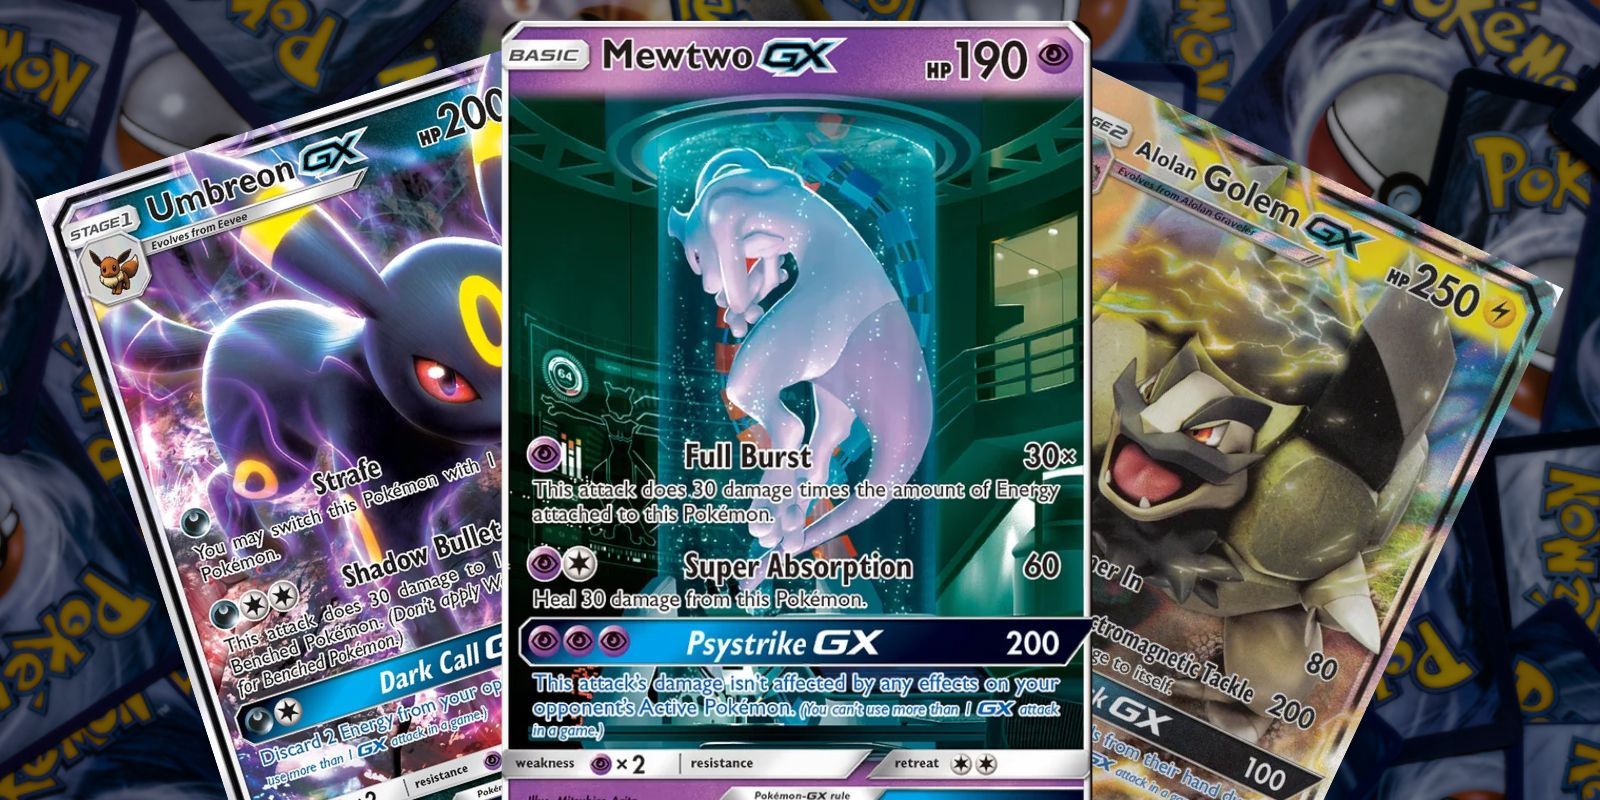 Pokemon GX cards collage featuring Umbreon, Mewtwo, and Alolan Golem